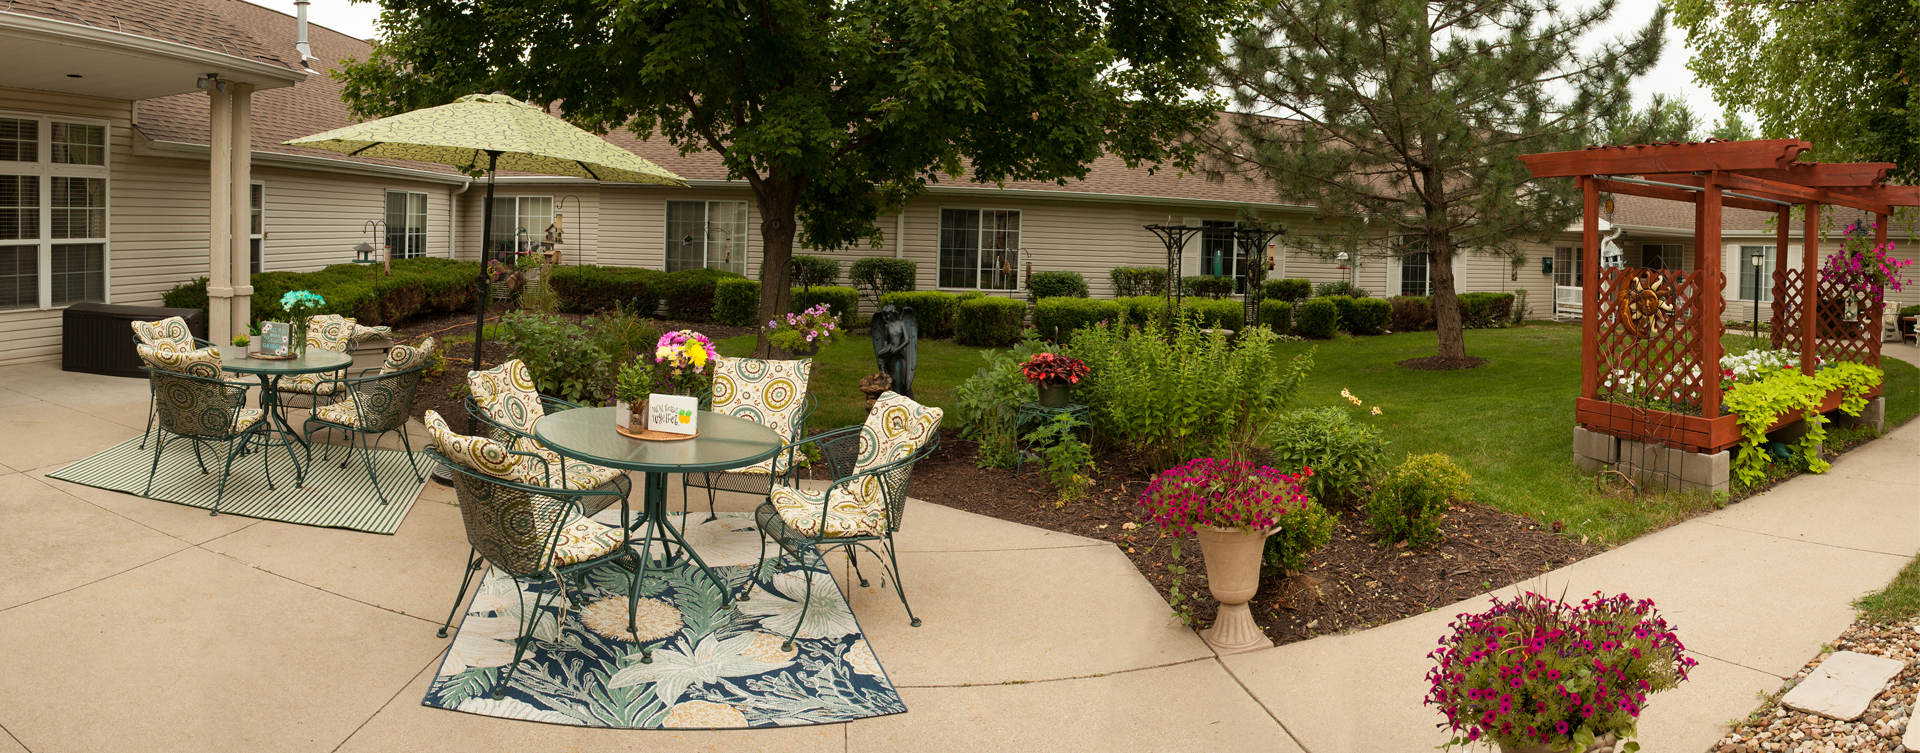 Enjoy the outdoors in a whole new light by stepping into our secure courtyard at Bickford of Cedar Falls